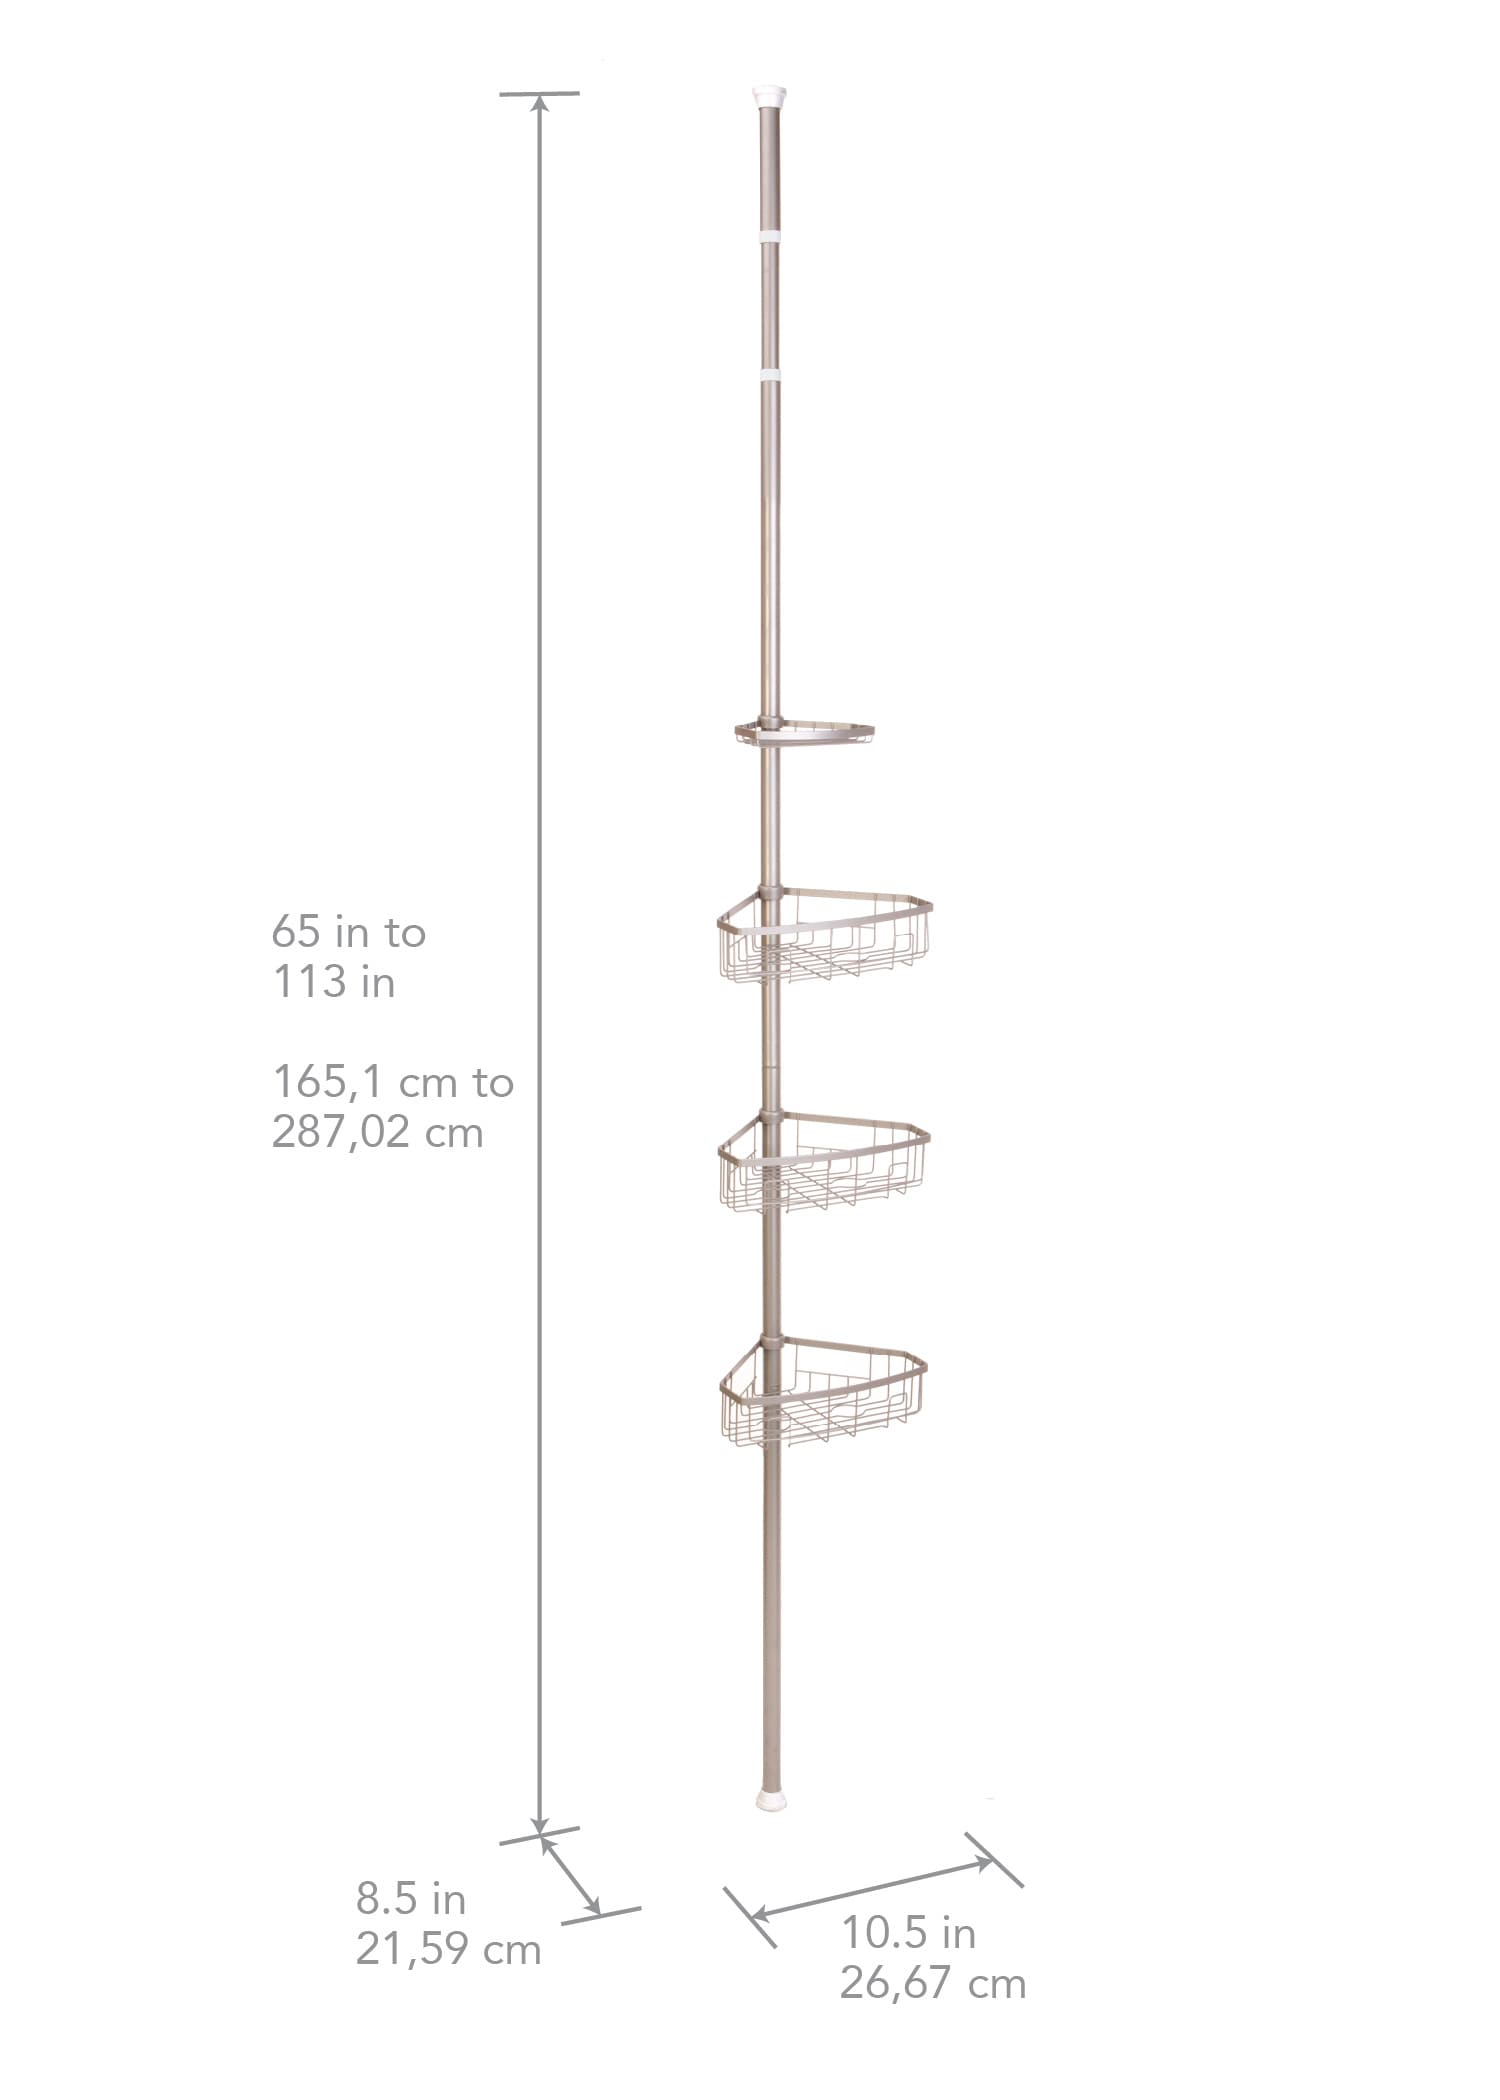 Style Selections Satin Nickel Aluminum 1-Shelf Hanging Shower Caddy  10.12-in x 7.33-in x 3.25-in in the Bathtub & Shower Caddies department at